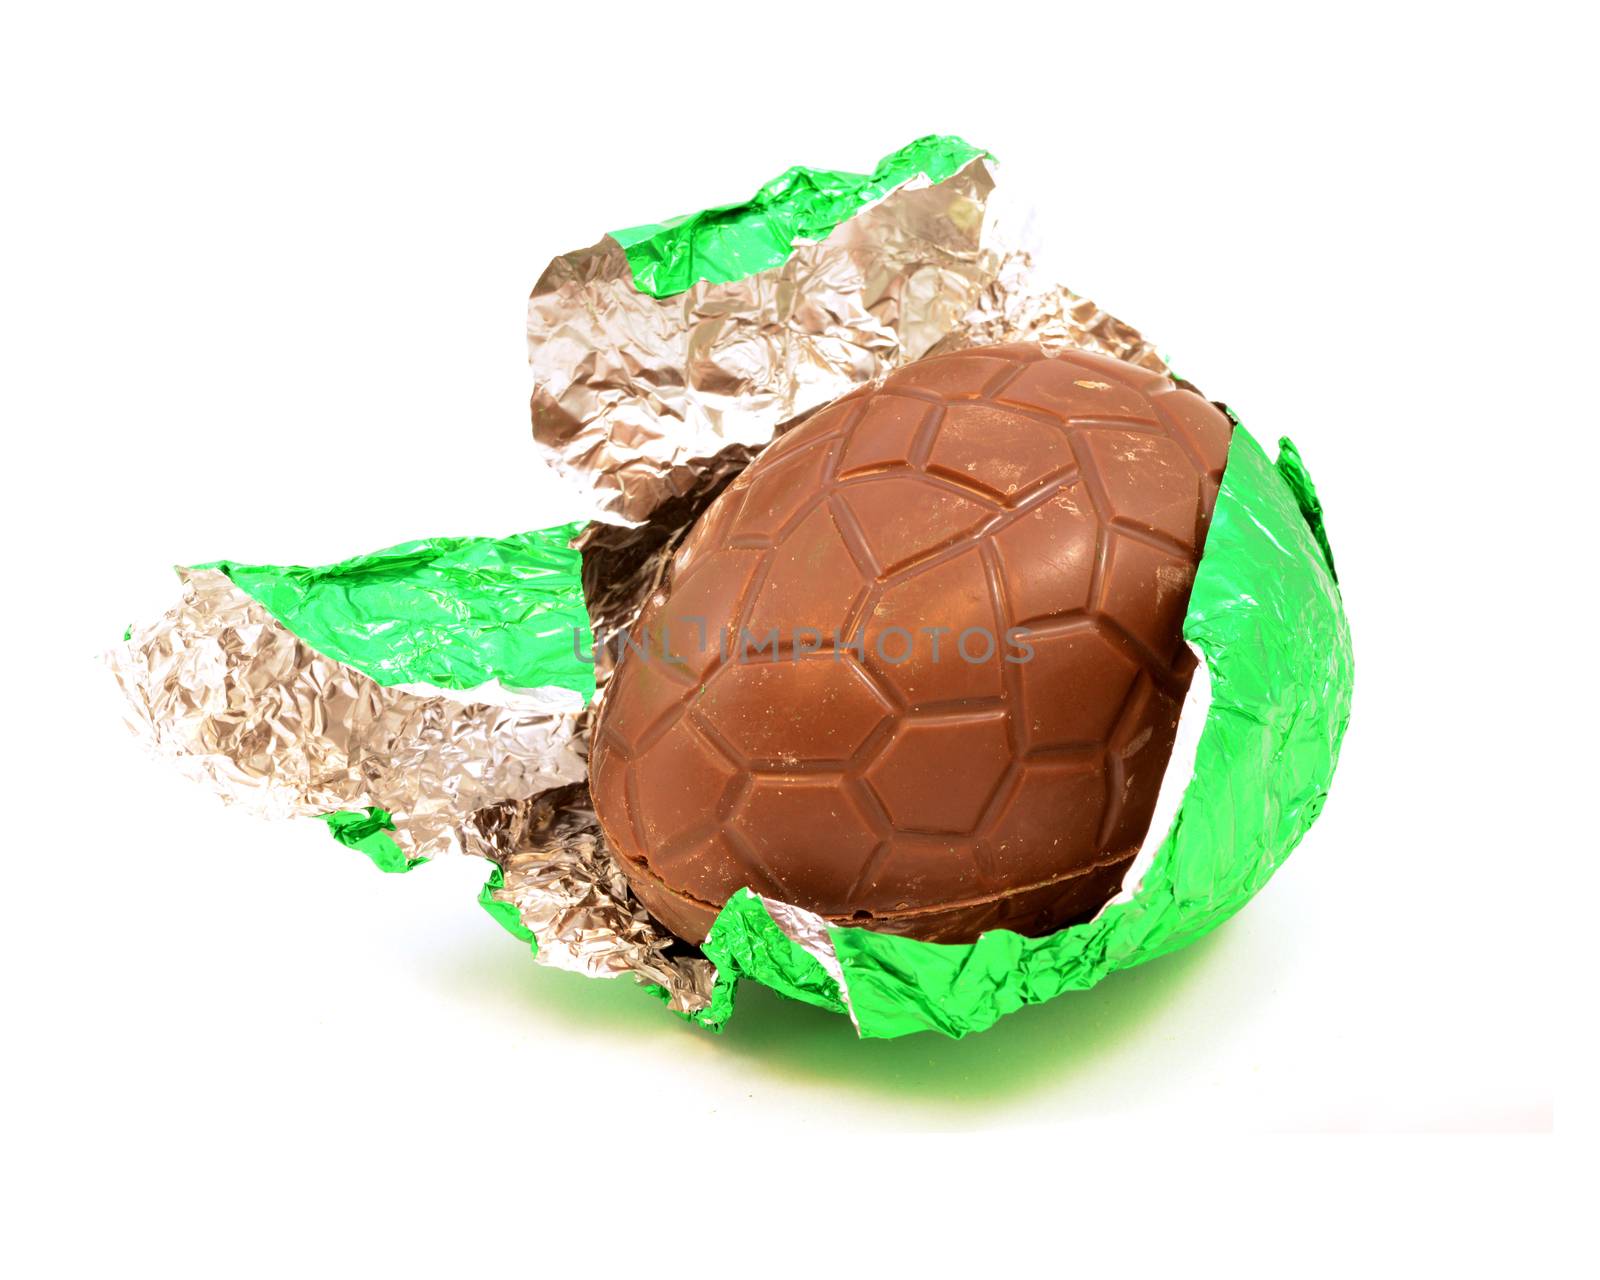 An isolated over white image of a hollow chocolate egg being unwrapped from its green foil.